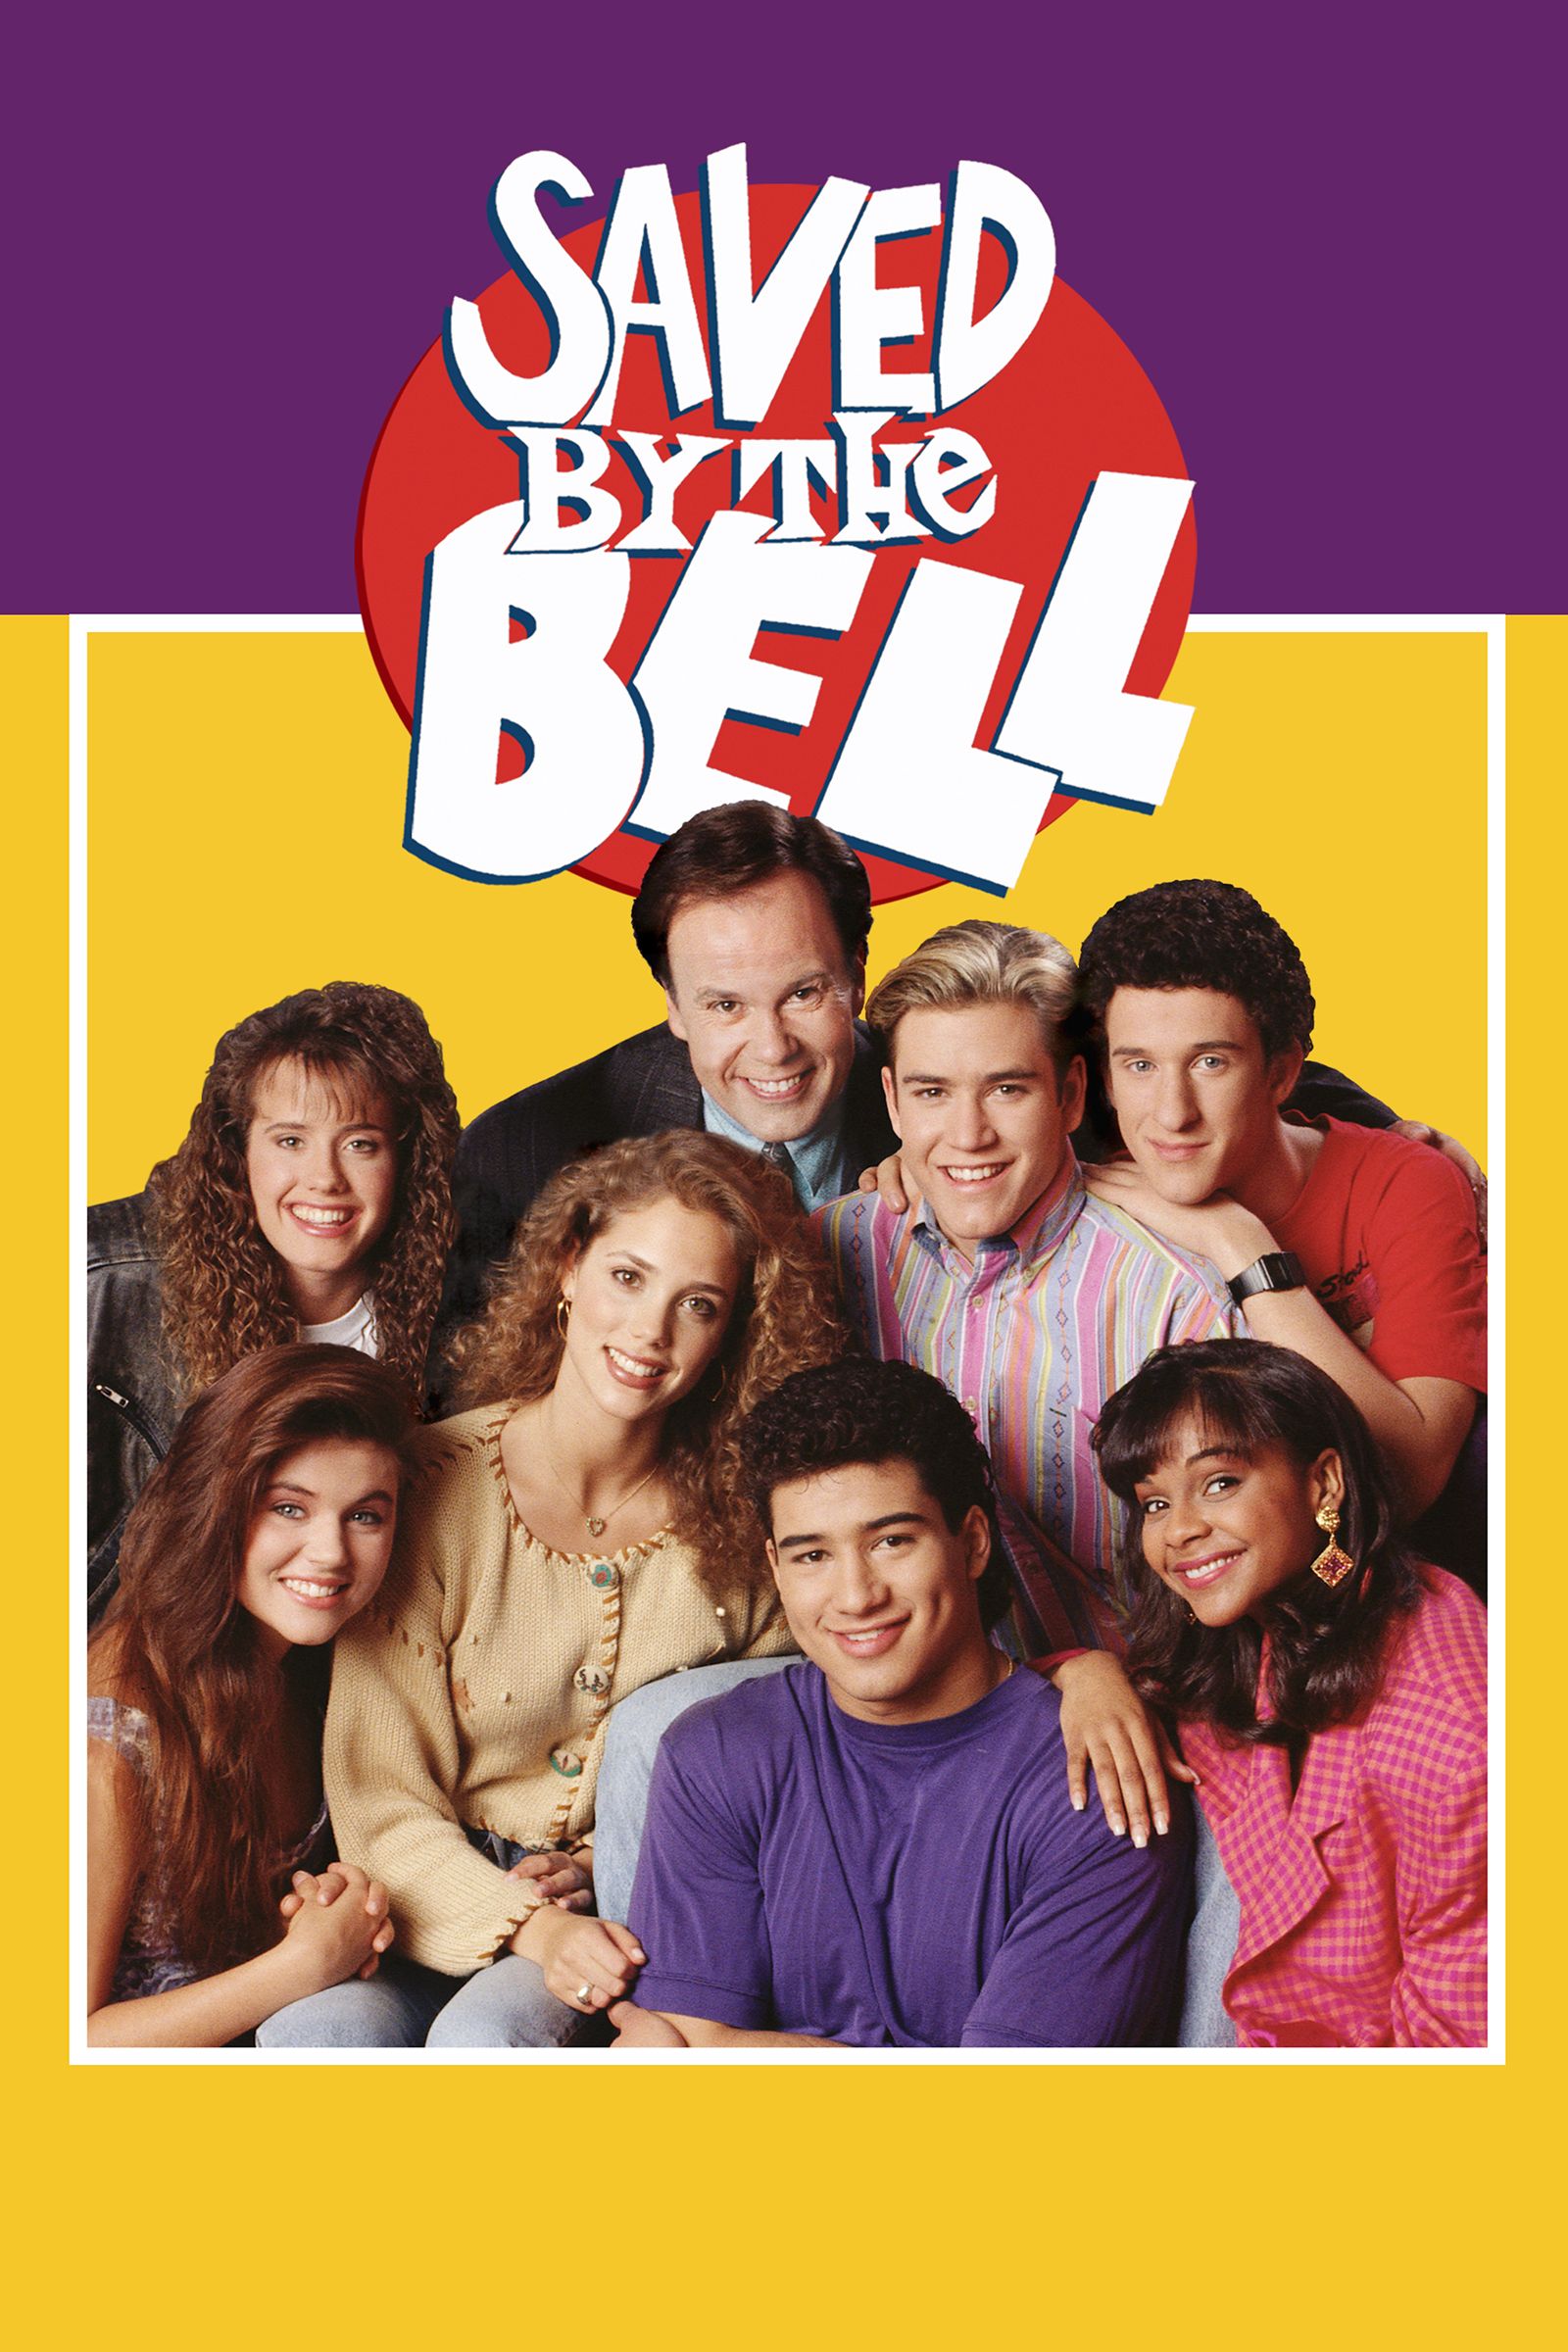 Saved by the bell TV Poster